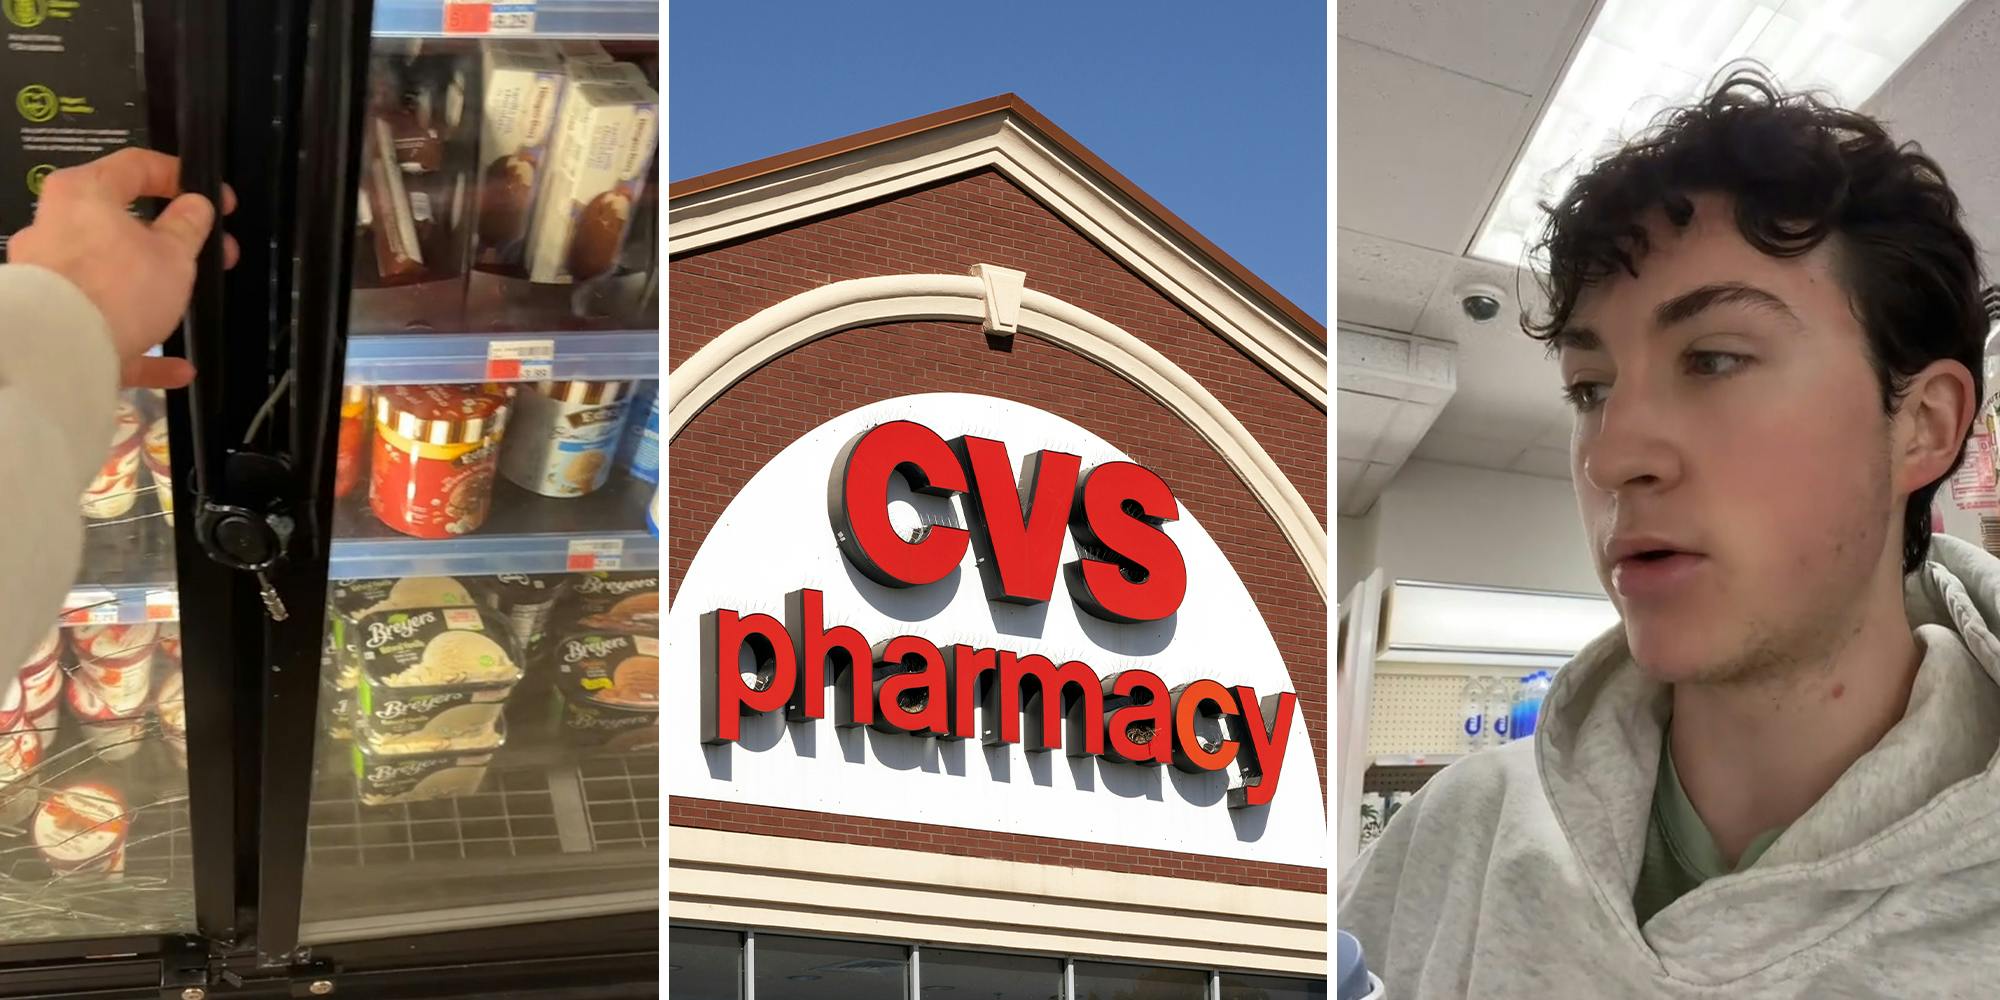 ‘I’d be so embarrassed’: CVS shopper has to push button to get worker to unlock ice cream, says it’s ‘degrading’